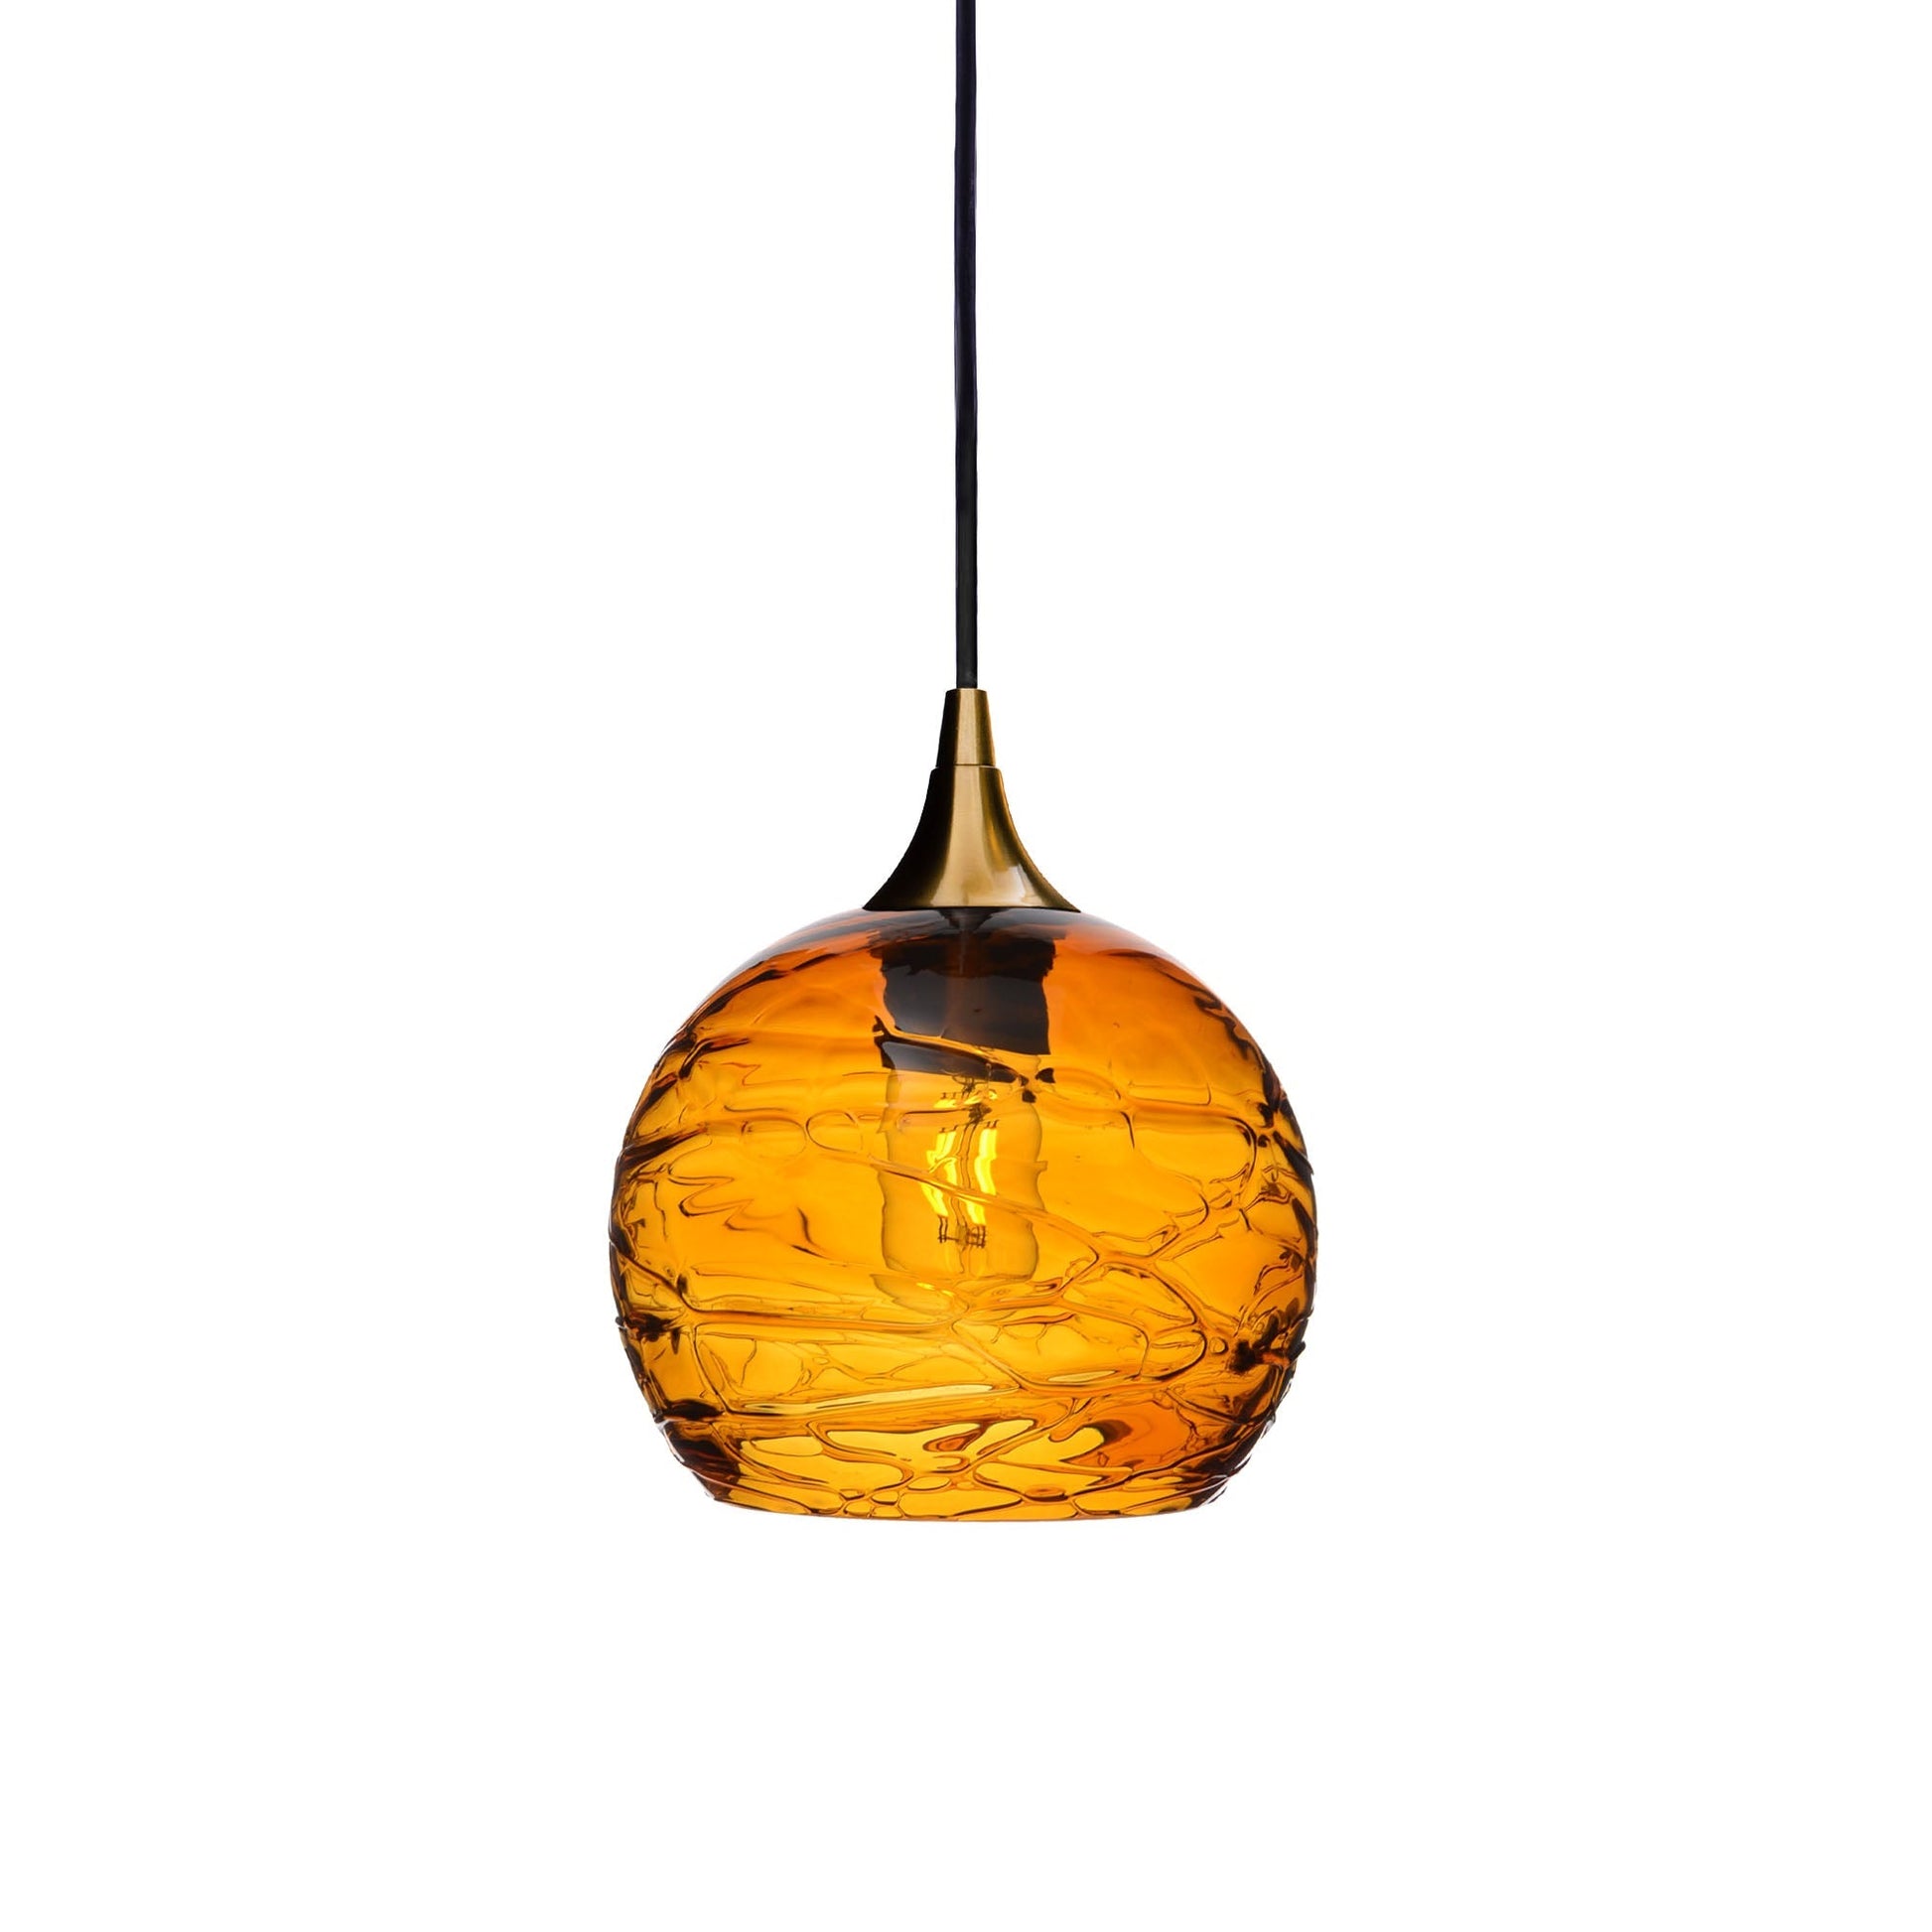 767 Spun: Single Pendant Light-Glass-Bicycle Glass Co - Hotshop-Harvest Gold-Polished Brass-Bicycle Glass Co